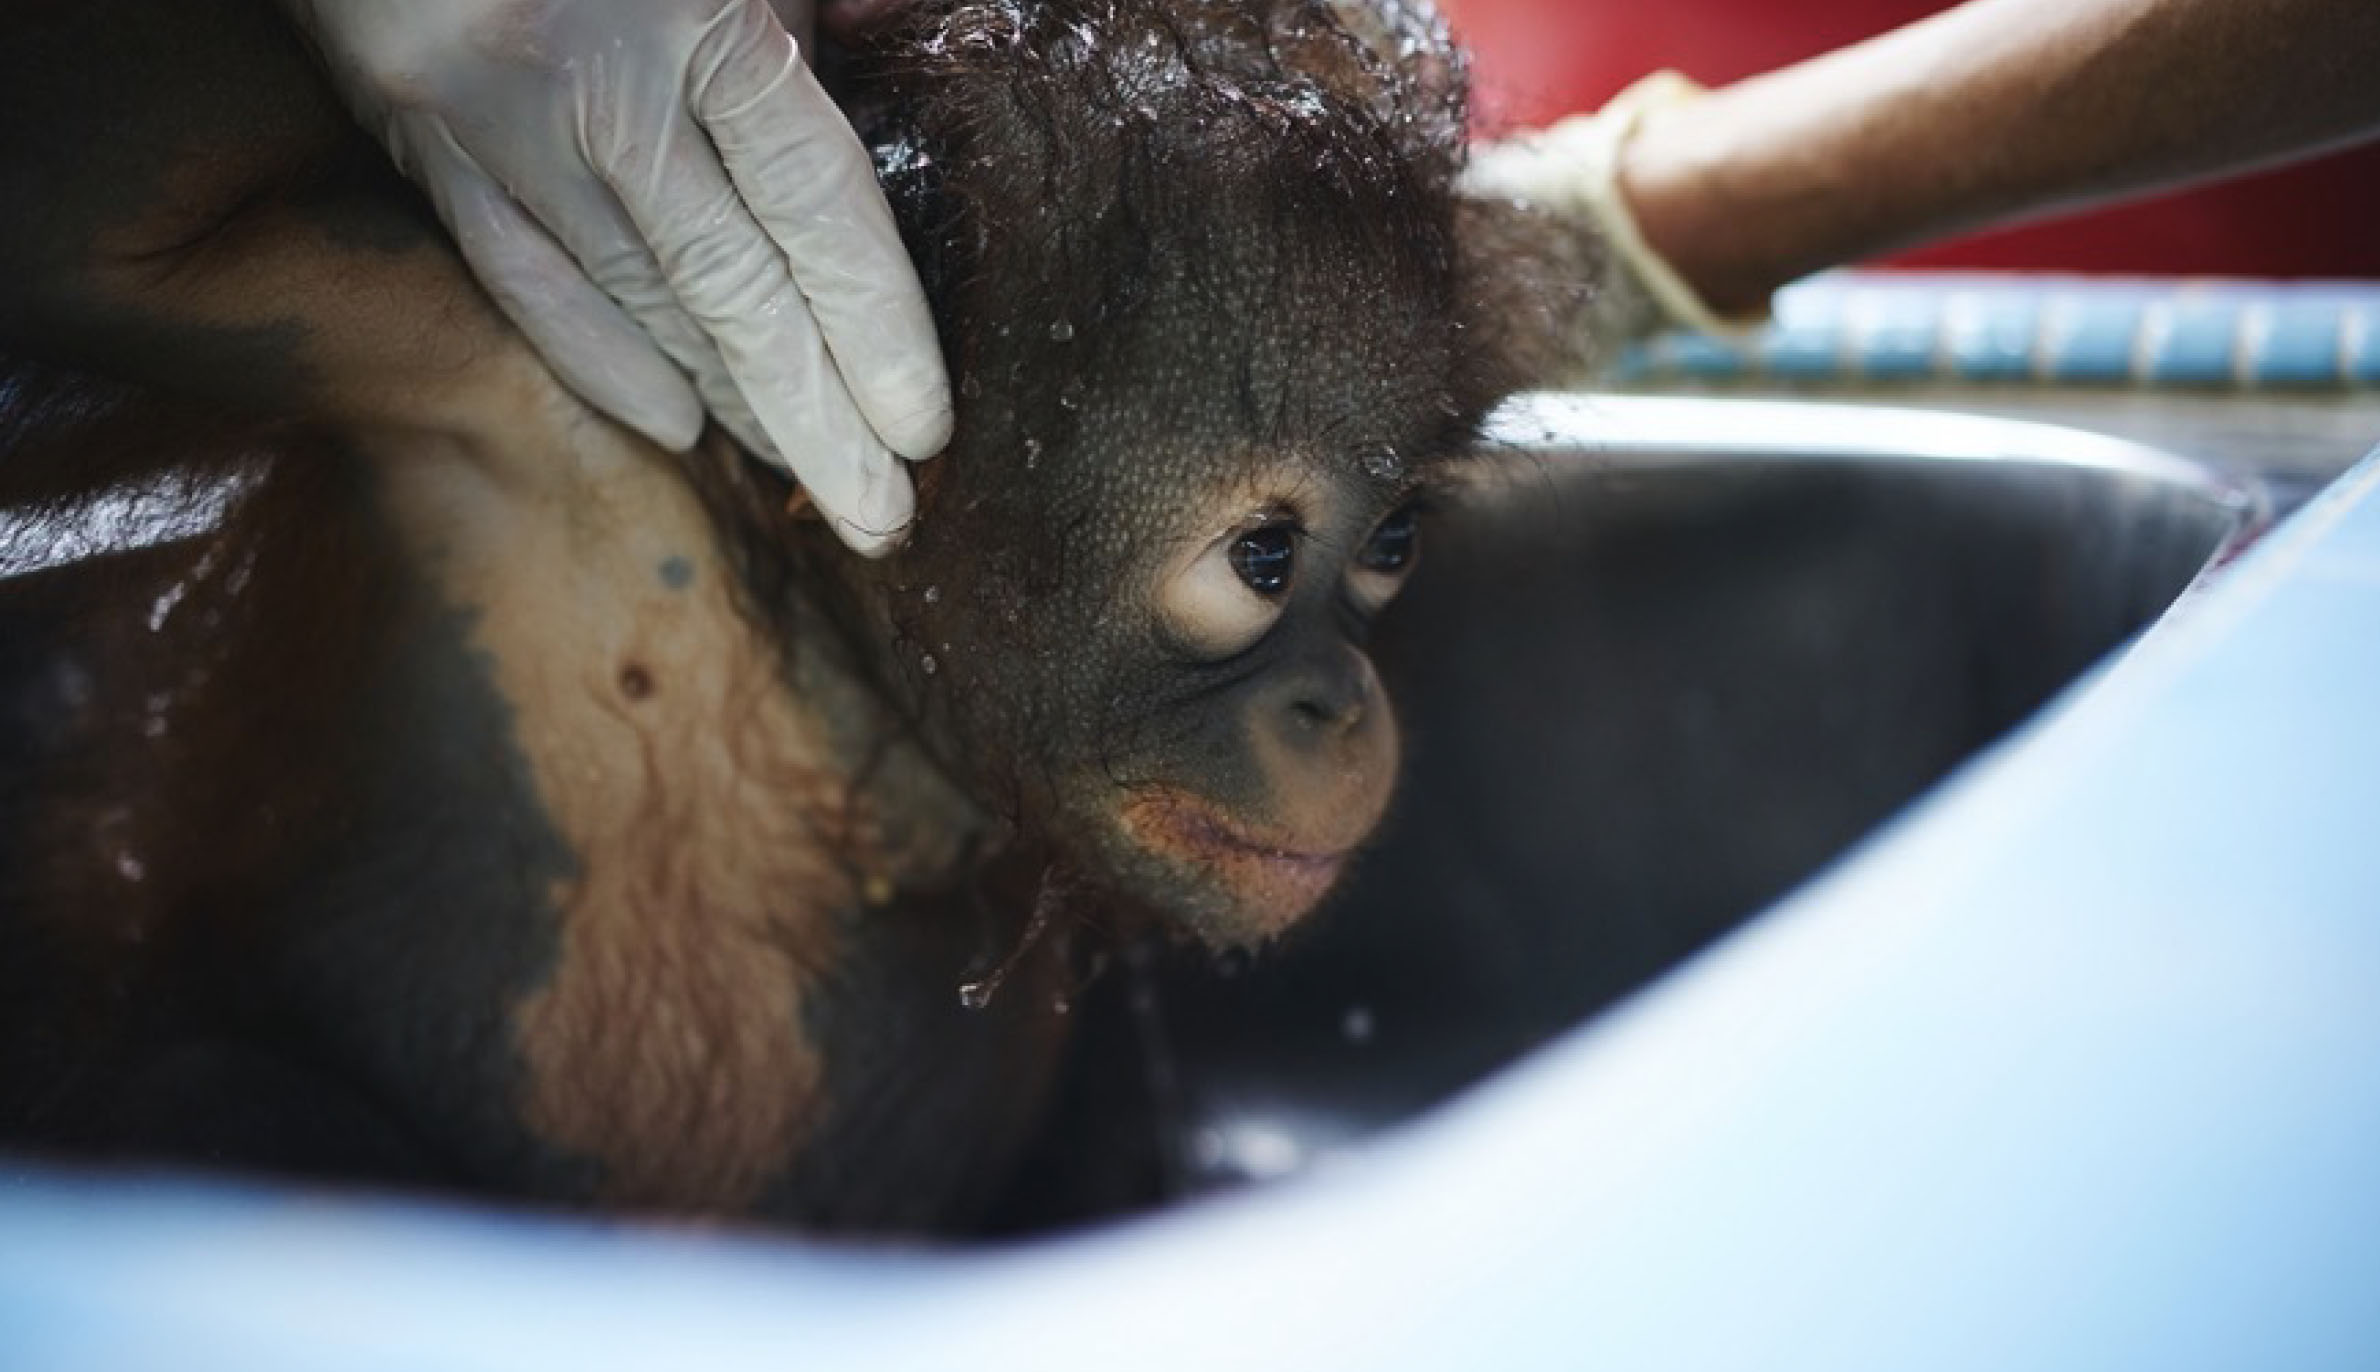 A photograph of an orphaned orangutan being bathed taken on Borneo Island.